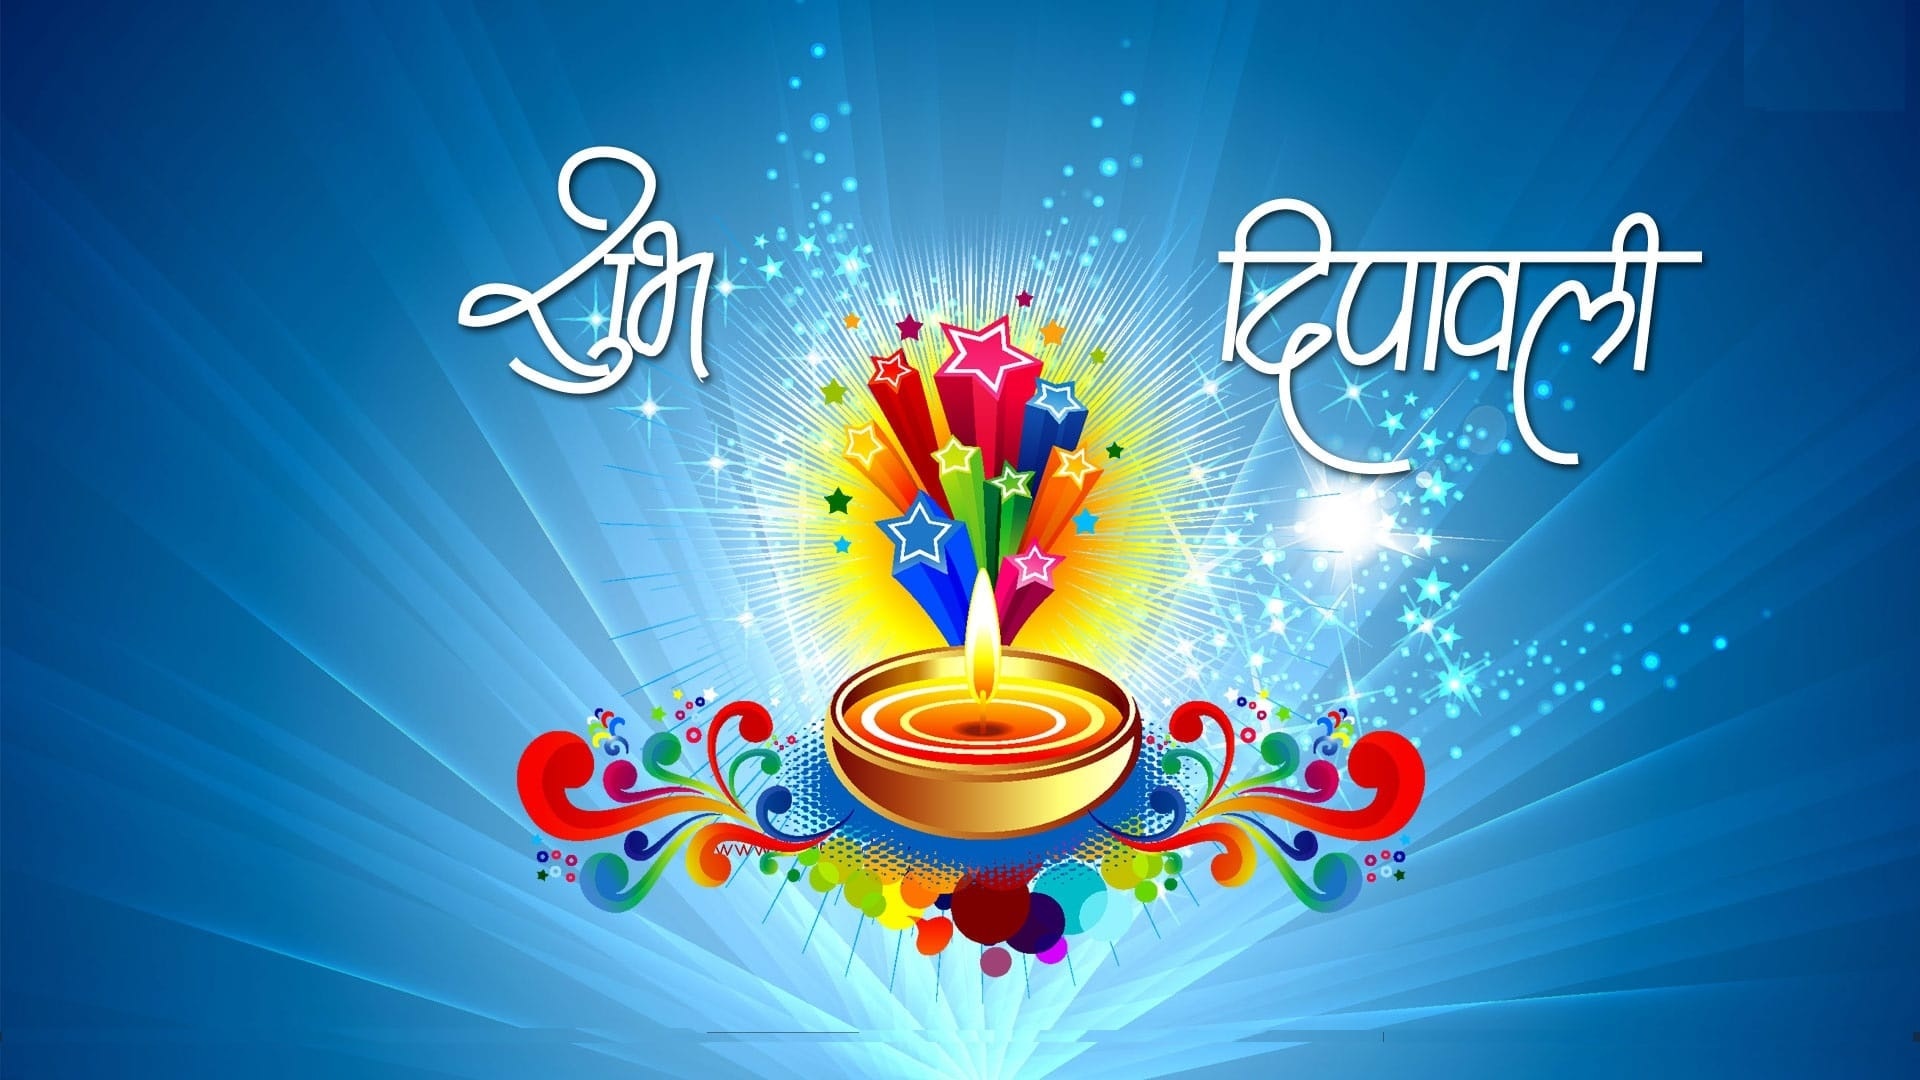 Happy Diwali 2022 Wishes Images Send This Love Filled Diwali Wishes and